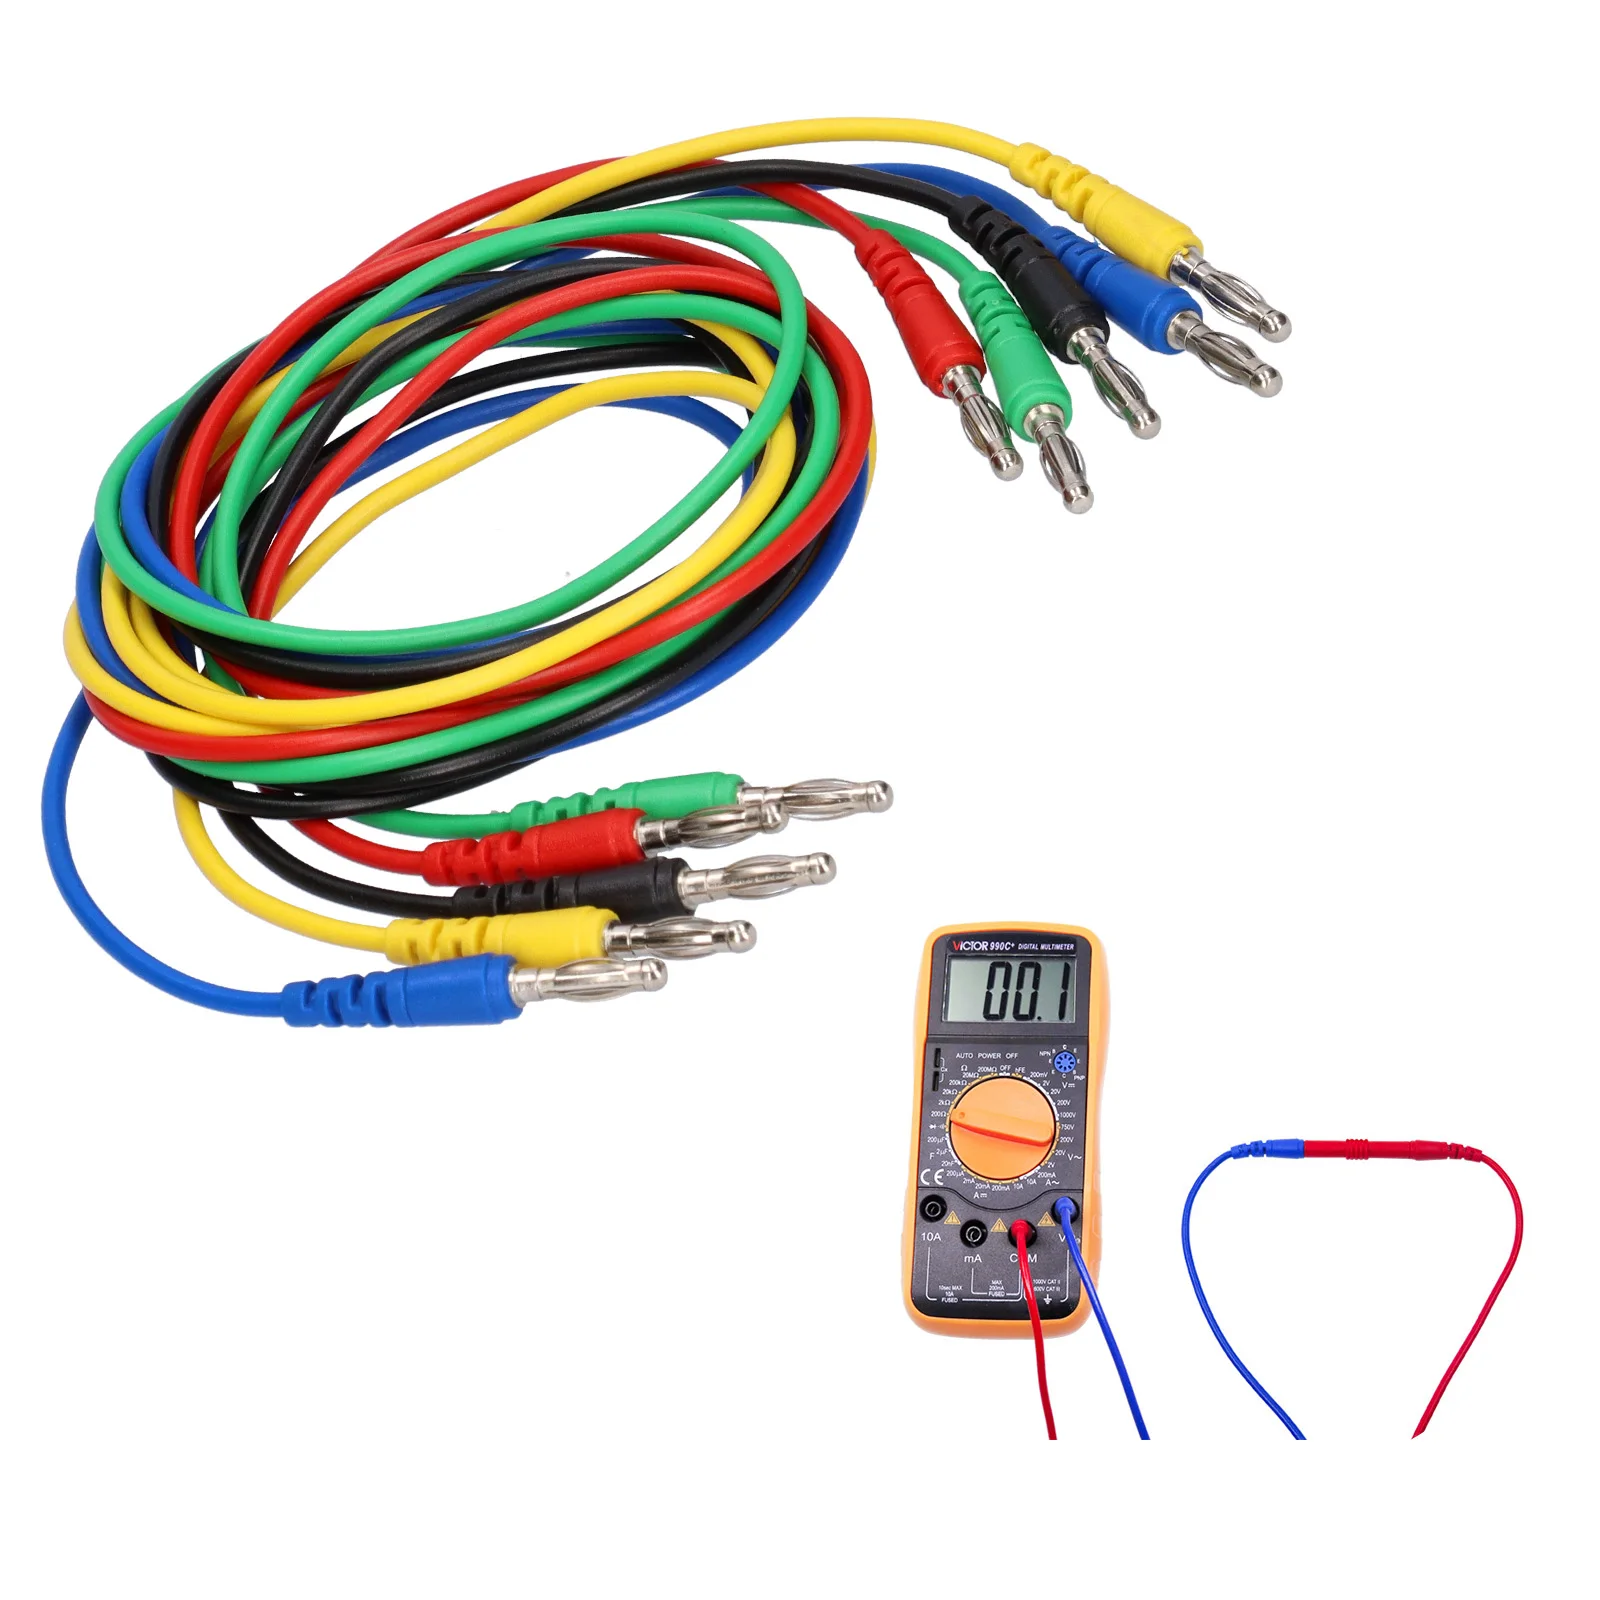 

P1043 4mm Banana Plug Test Line Injection Molded Male to Male Multimeter Cable 1000V/10A Flexible Wire Lead for Electric Testing